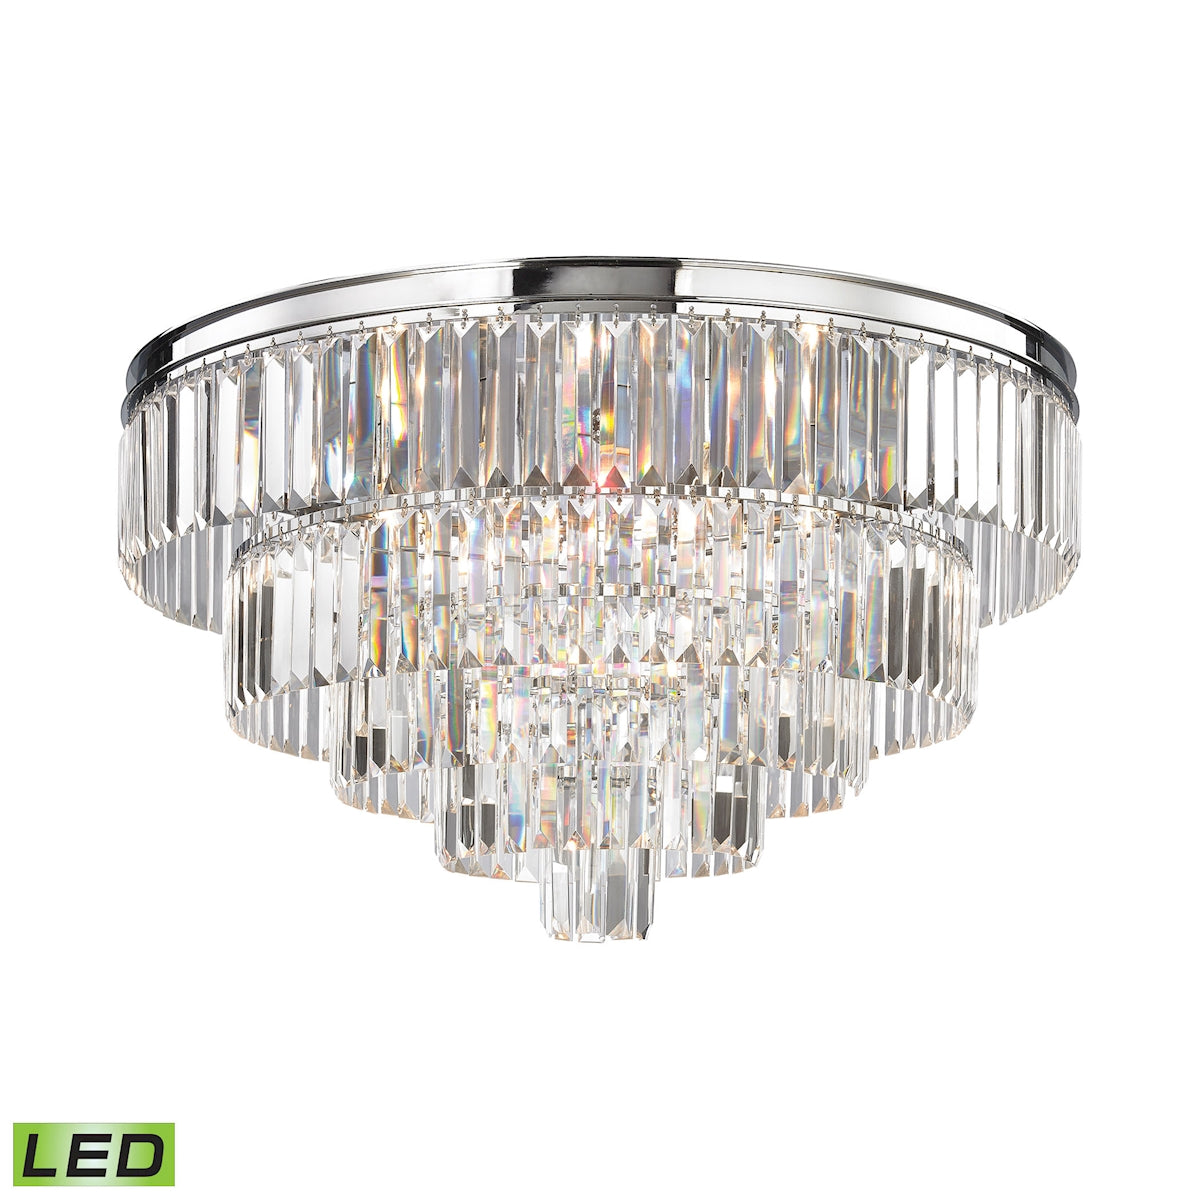 ELK Lighting 15216/6-LED Palacial 6-Light Chandelier in Polished Chrome with Clear Crystal - Includes LED Bulbs